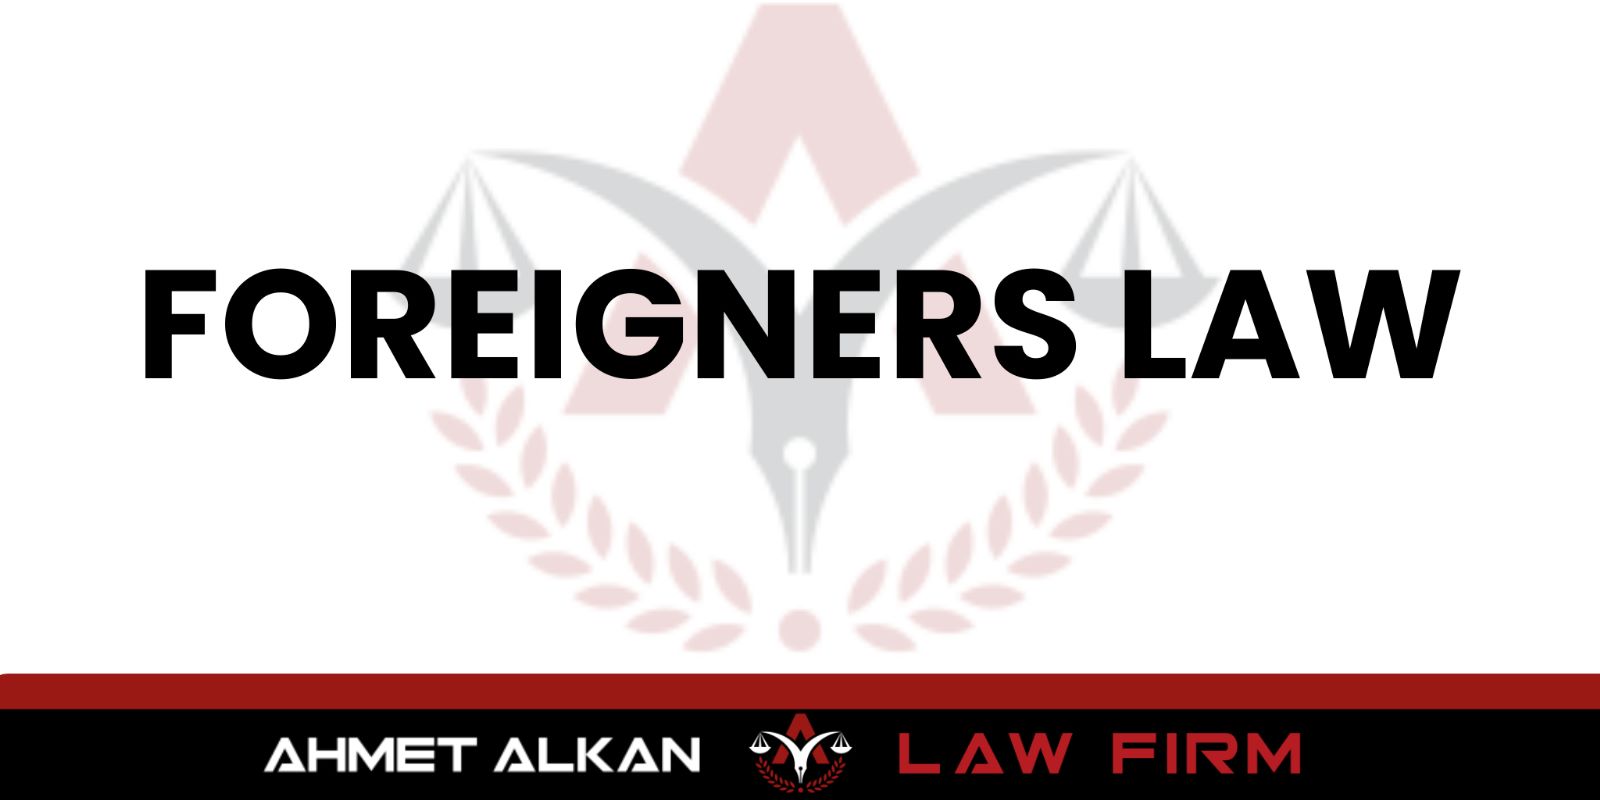 Antalya Attorney of Foreigners Law, who has competence in foreigners law, international law, immigration and refugee law, provides legal consultancy and case follow-up services for the clients.